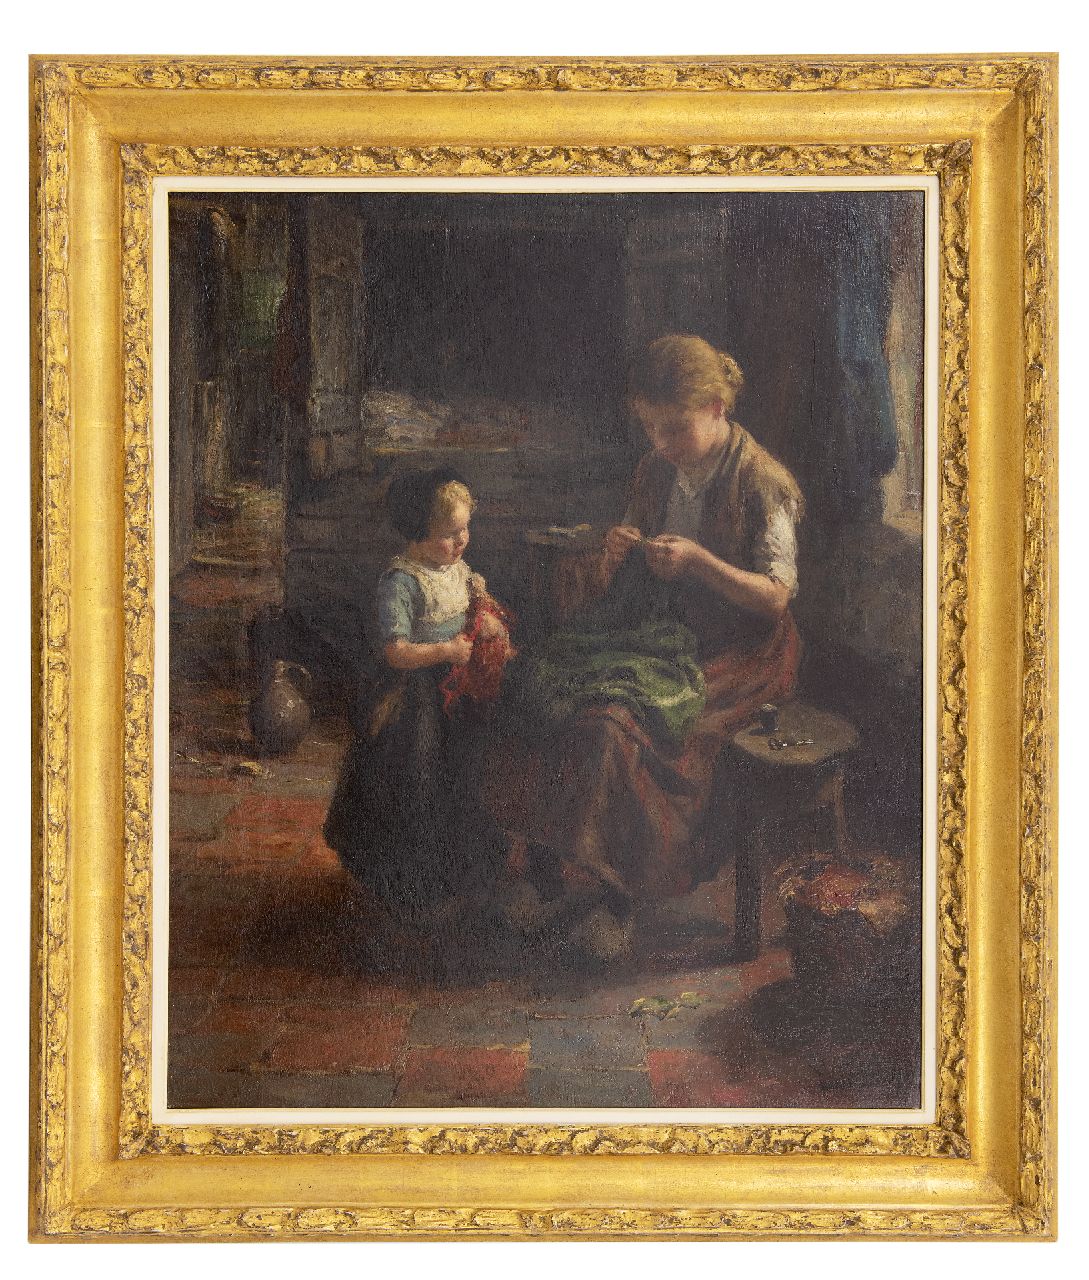 Pieters E.  | Evert Pieters, Catch them young, oil on canvas 75.5 x 62.2 cm, signed l.r.